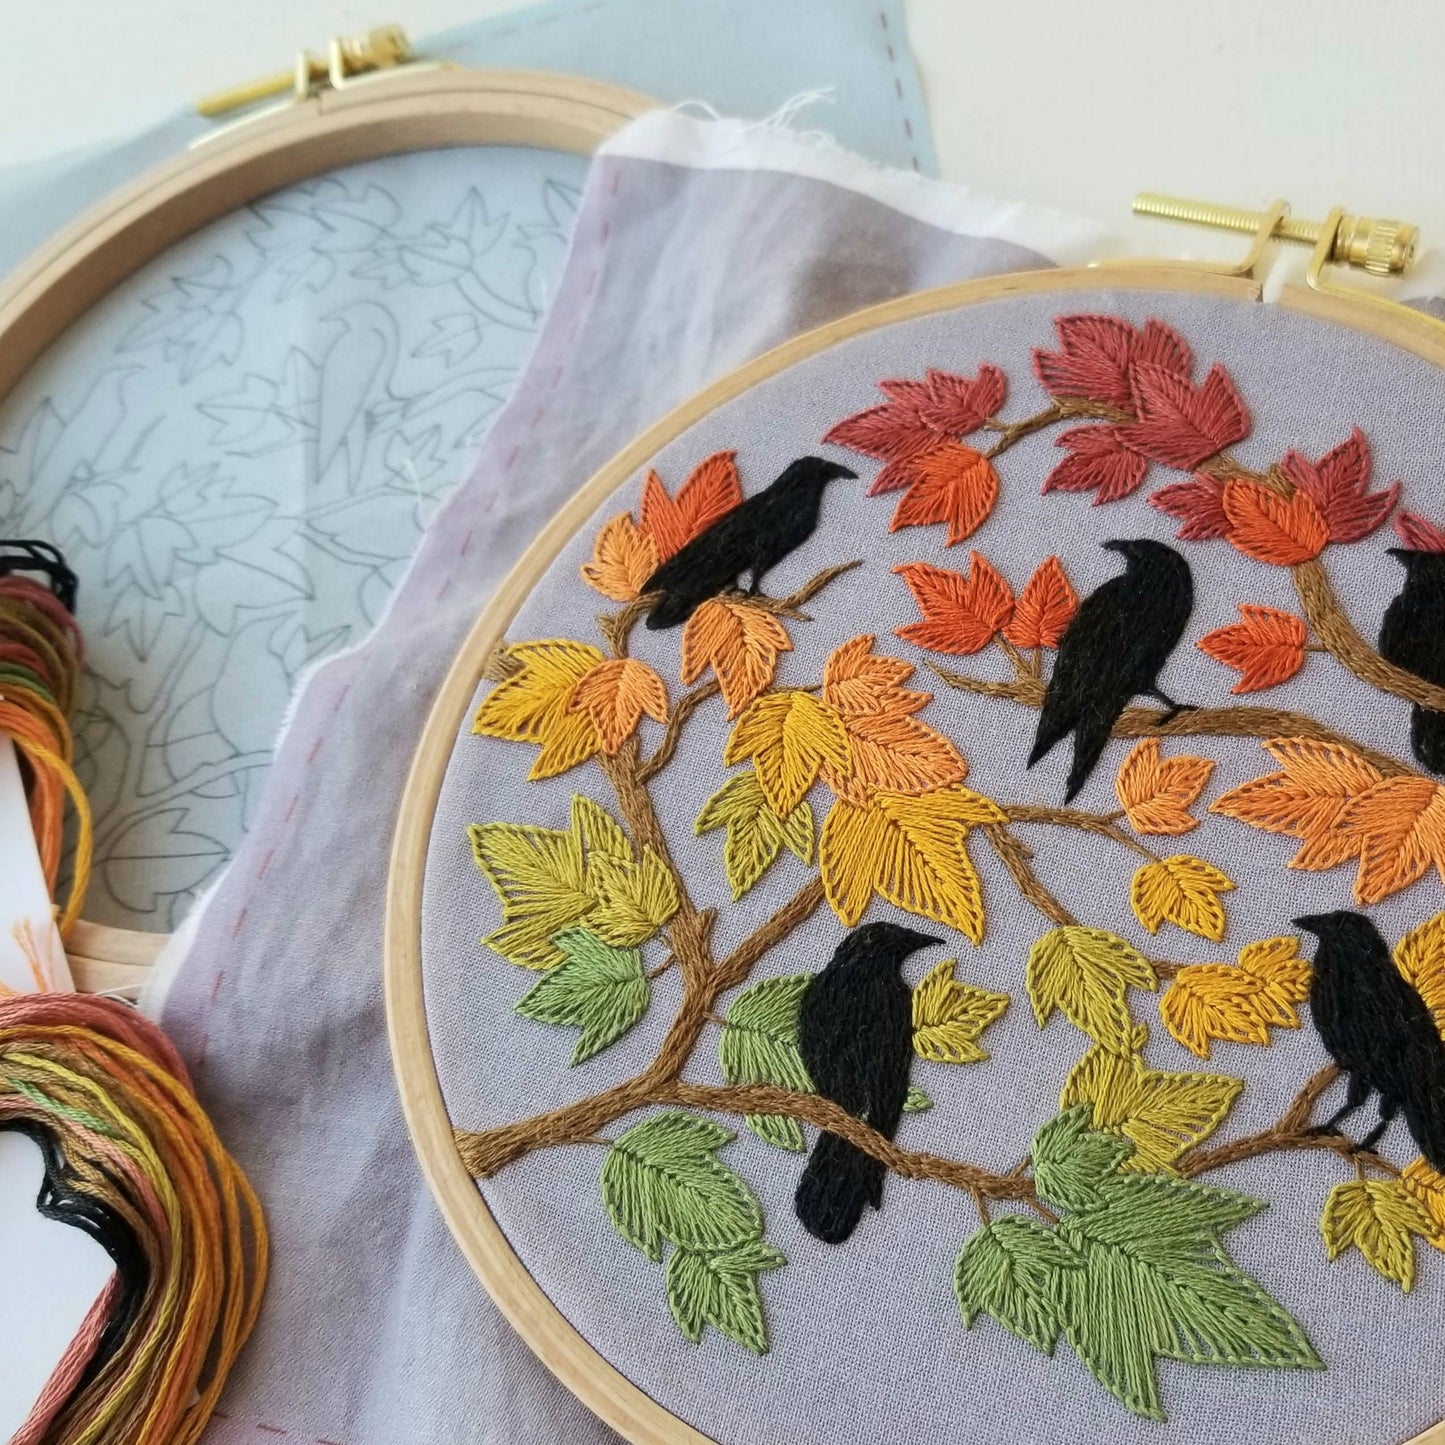 Jessica Long Embroidery - Autumn Birds Embroidery Kit